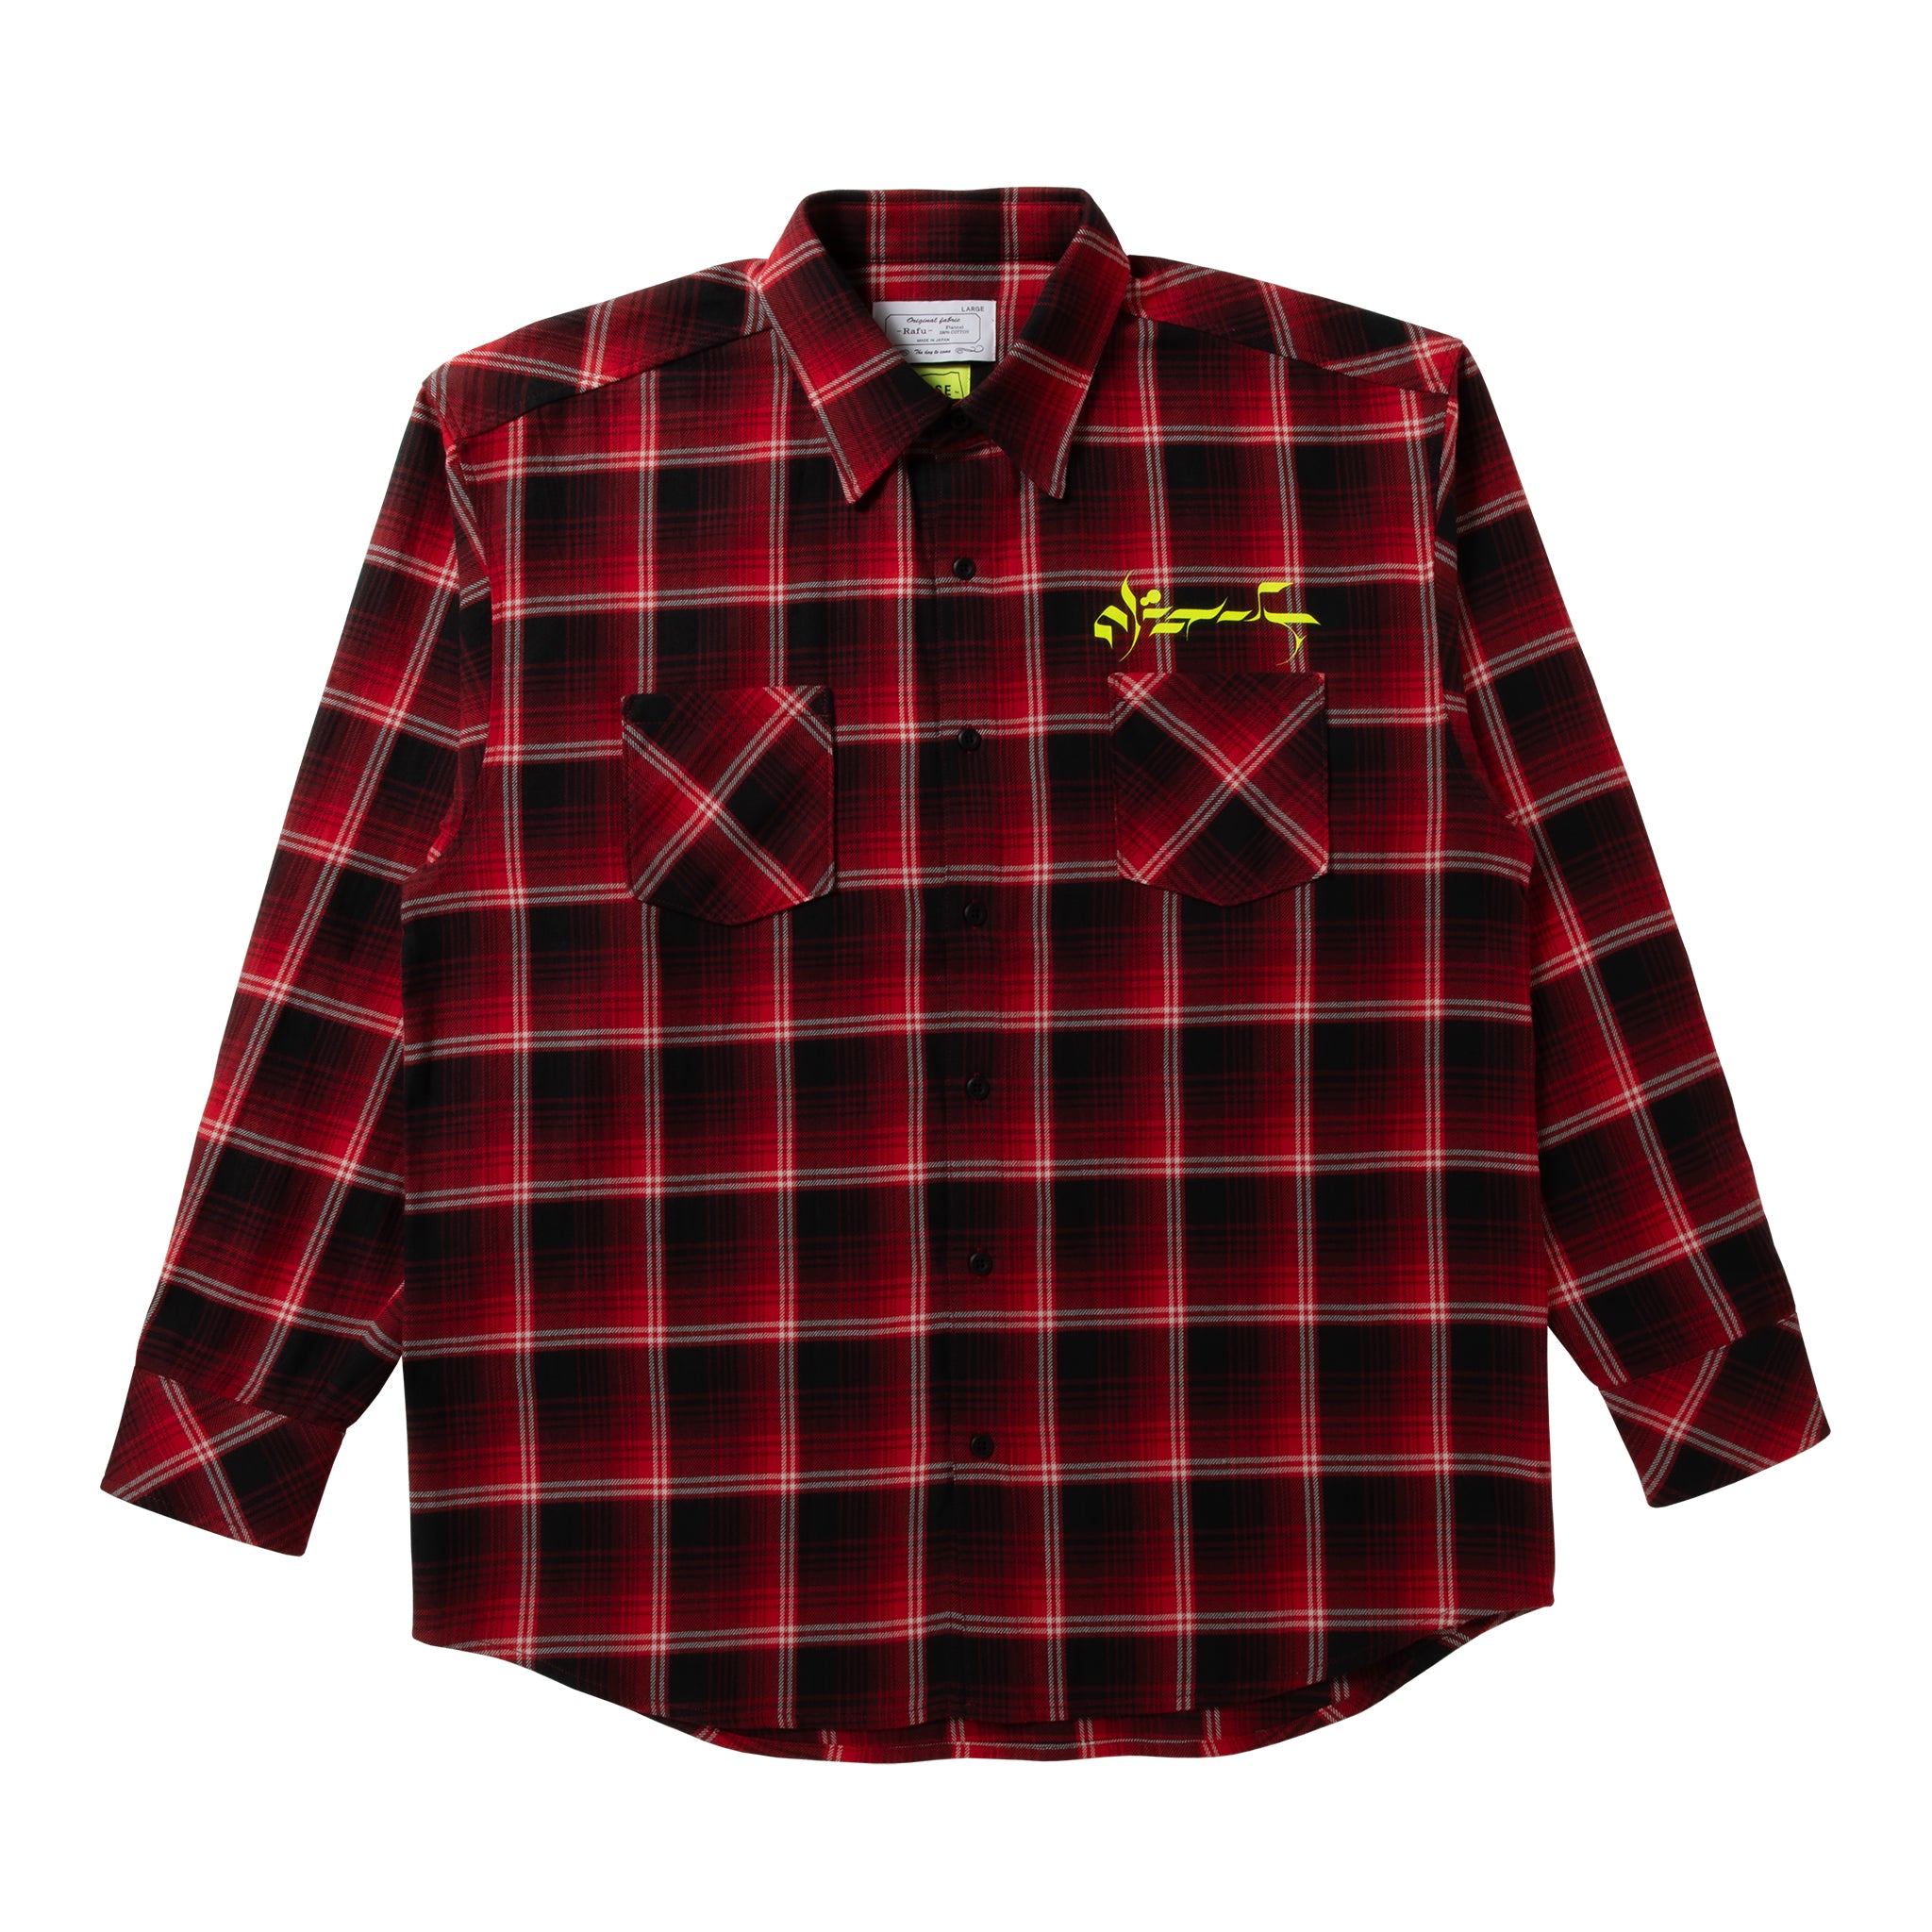 loosejoints≒RAFU - GUCCIMAZE - 'Joints' Fluo printed Flannel shirt (Red)